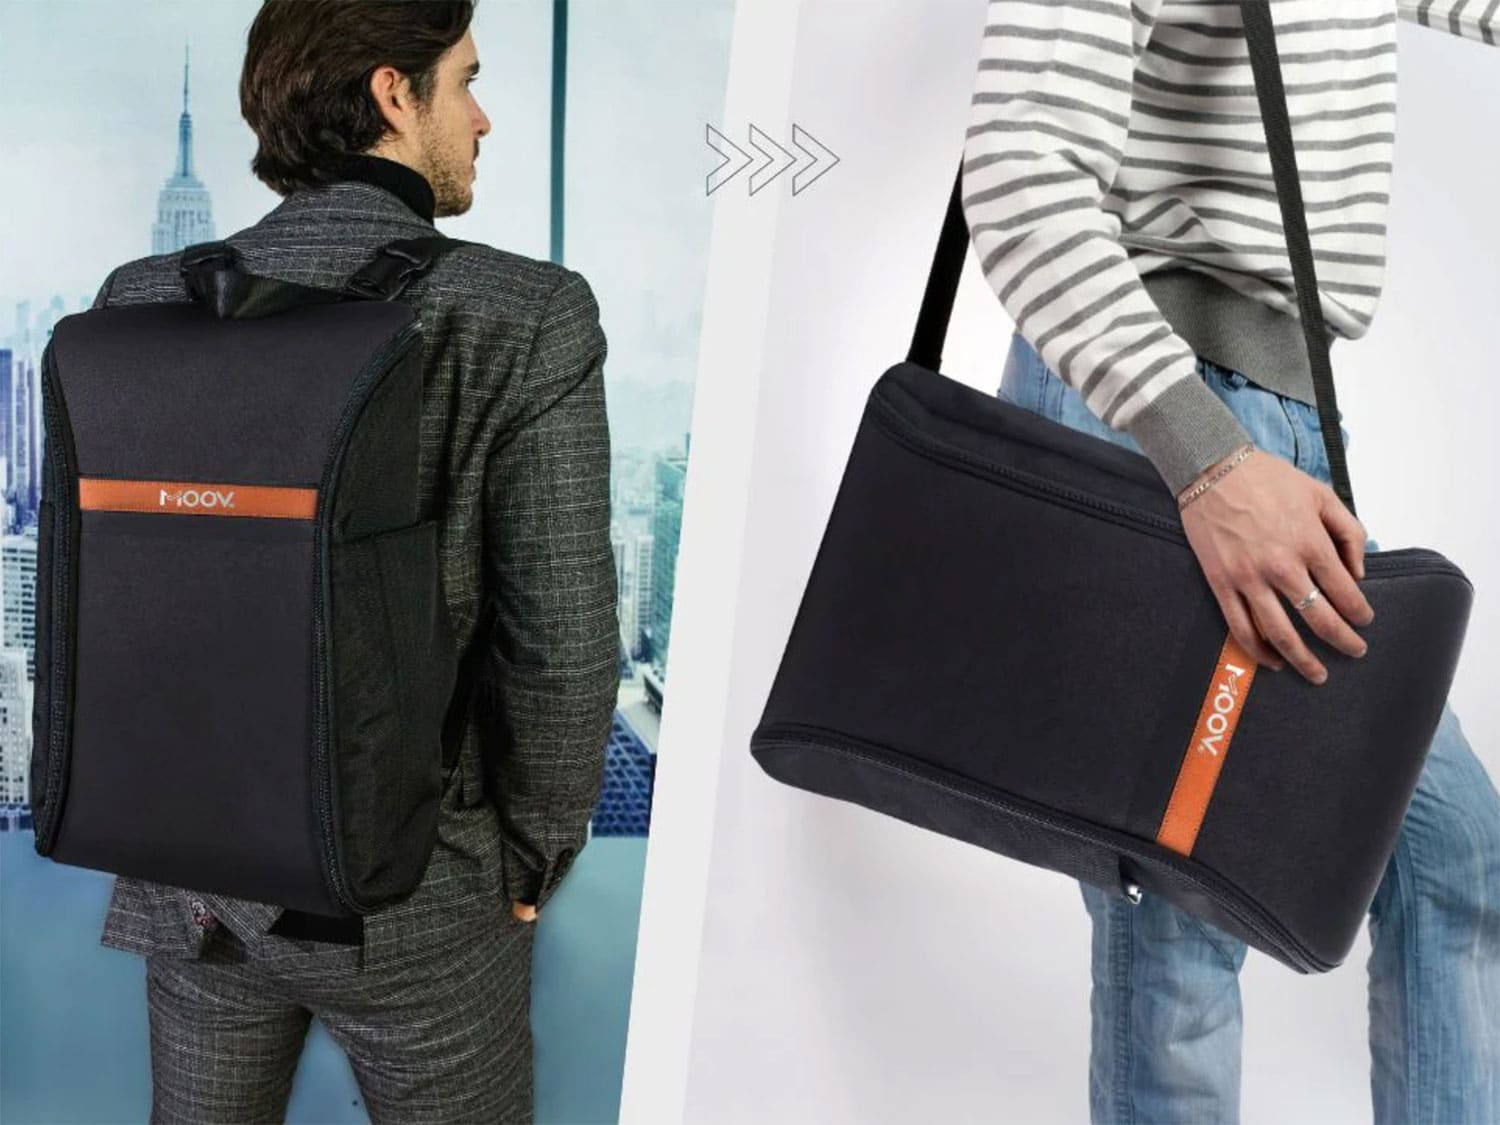 The MOOV Convertible Catalyst Laptop Bag